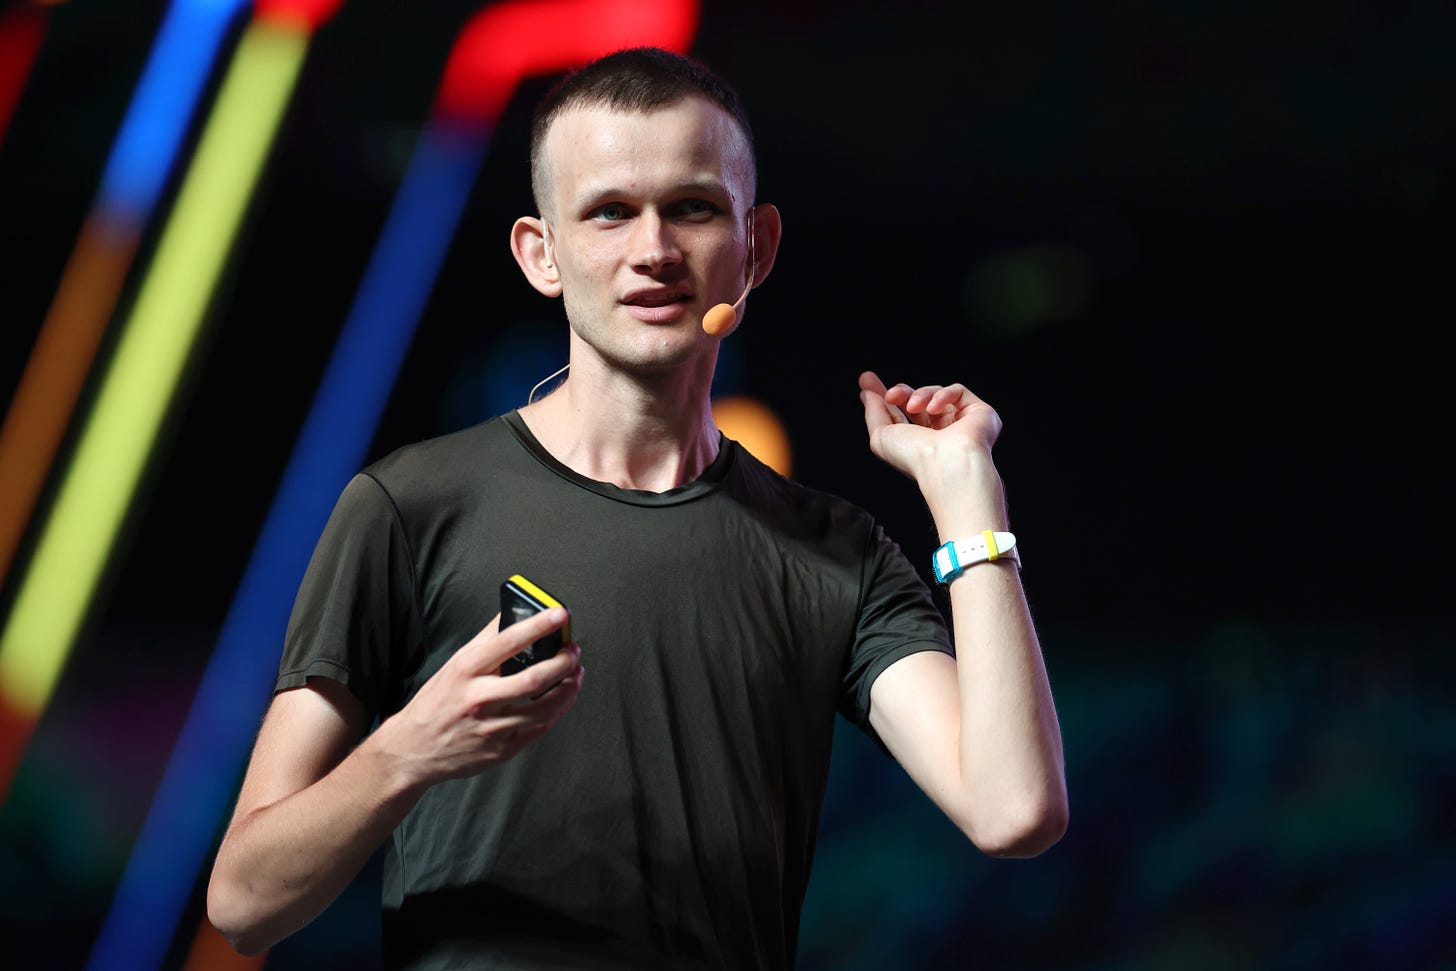 Vitalik Buterin CNBC interview: Ethereum founder on U.S. crypto crackdown